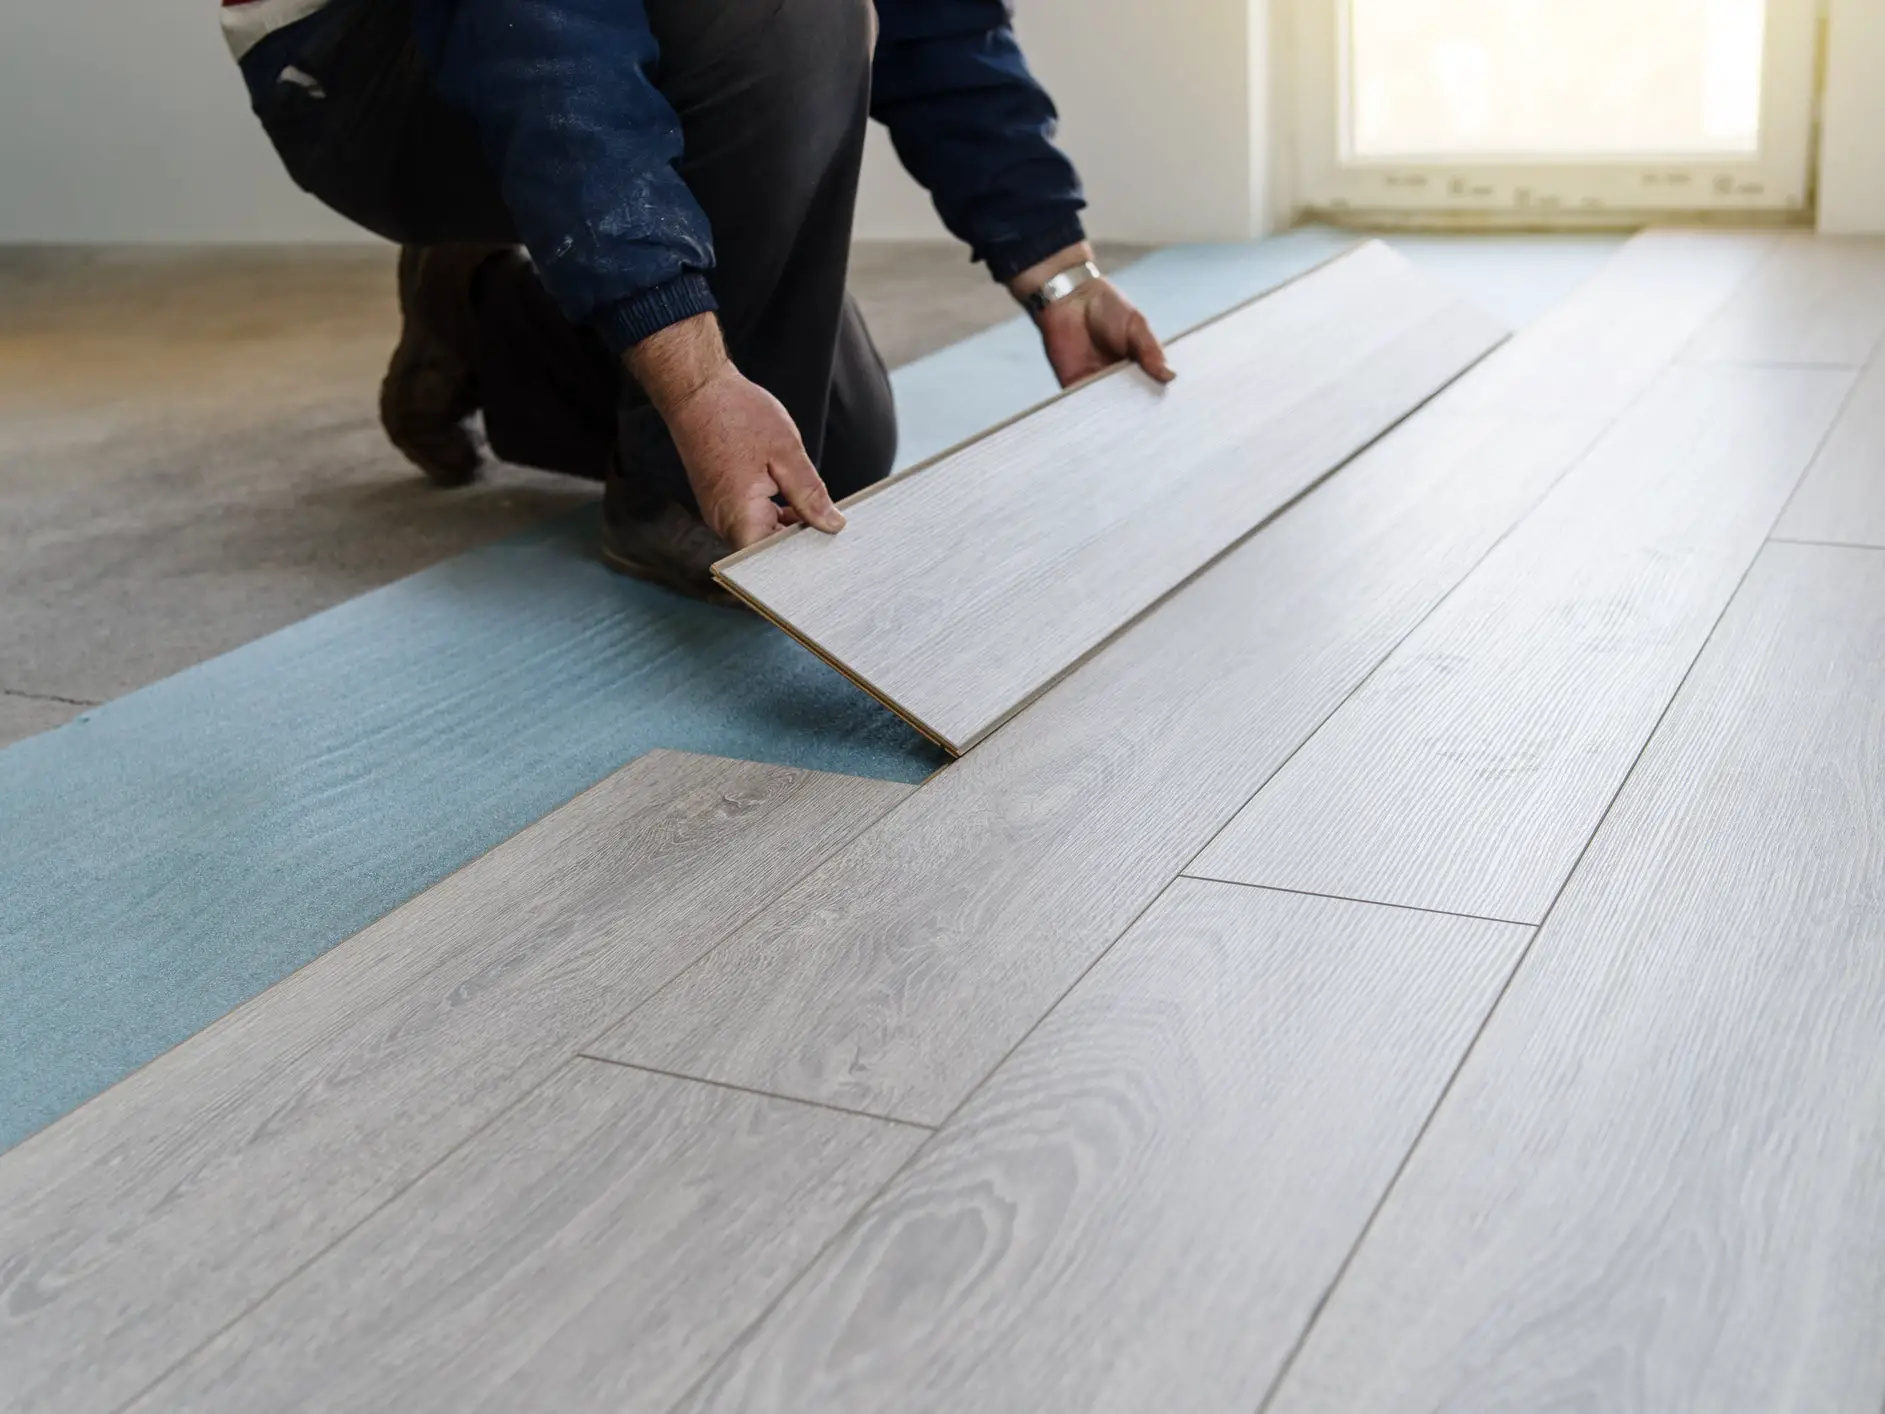 How To Install Temporary Flooring Over, How To Install Carpet Over Vinyl Flooring